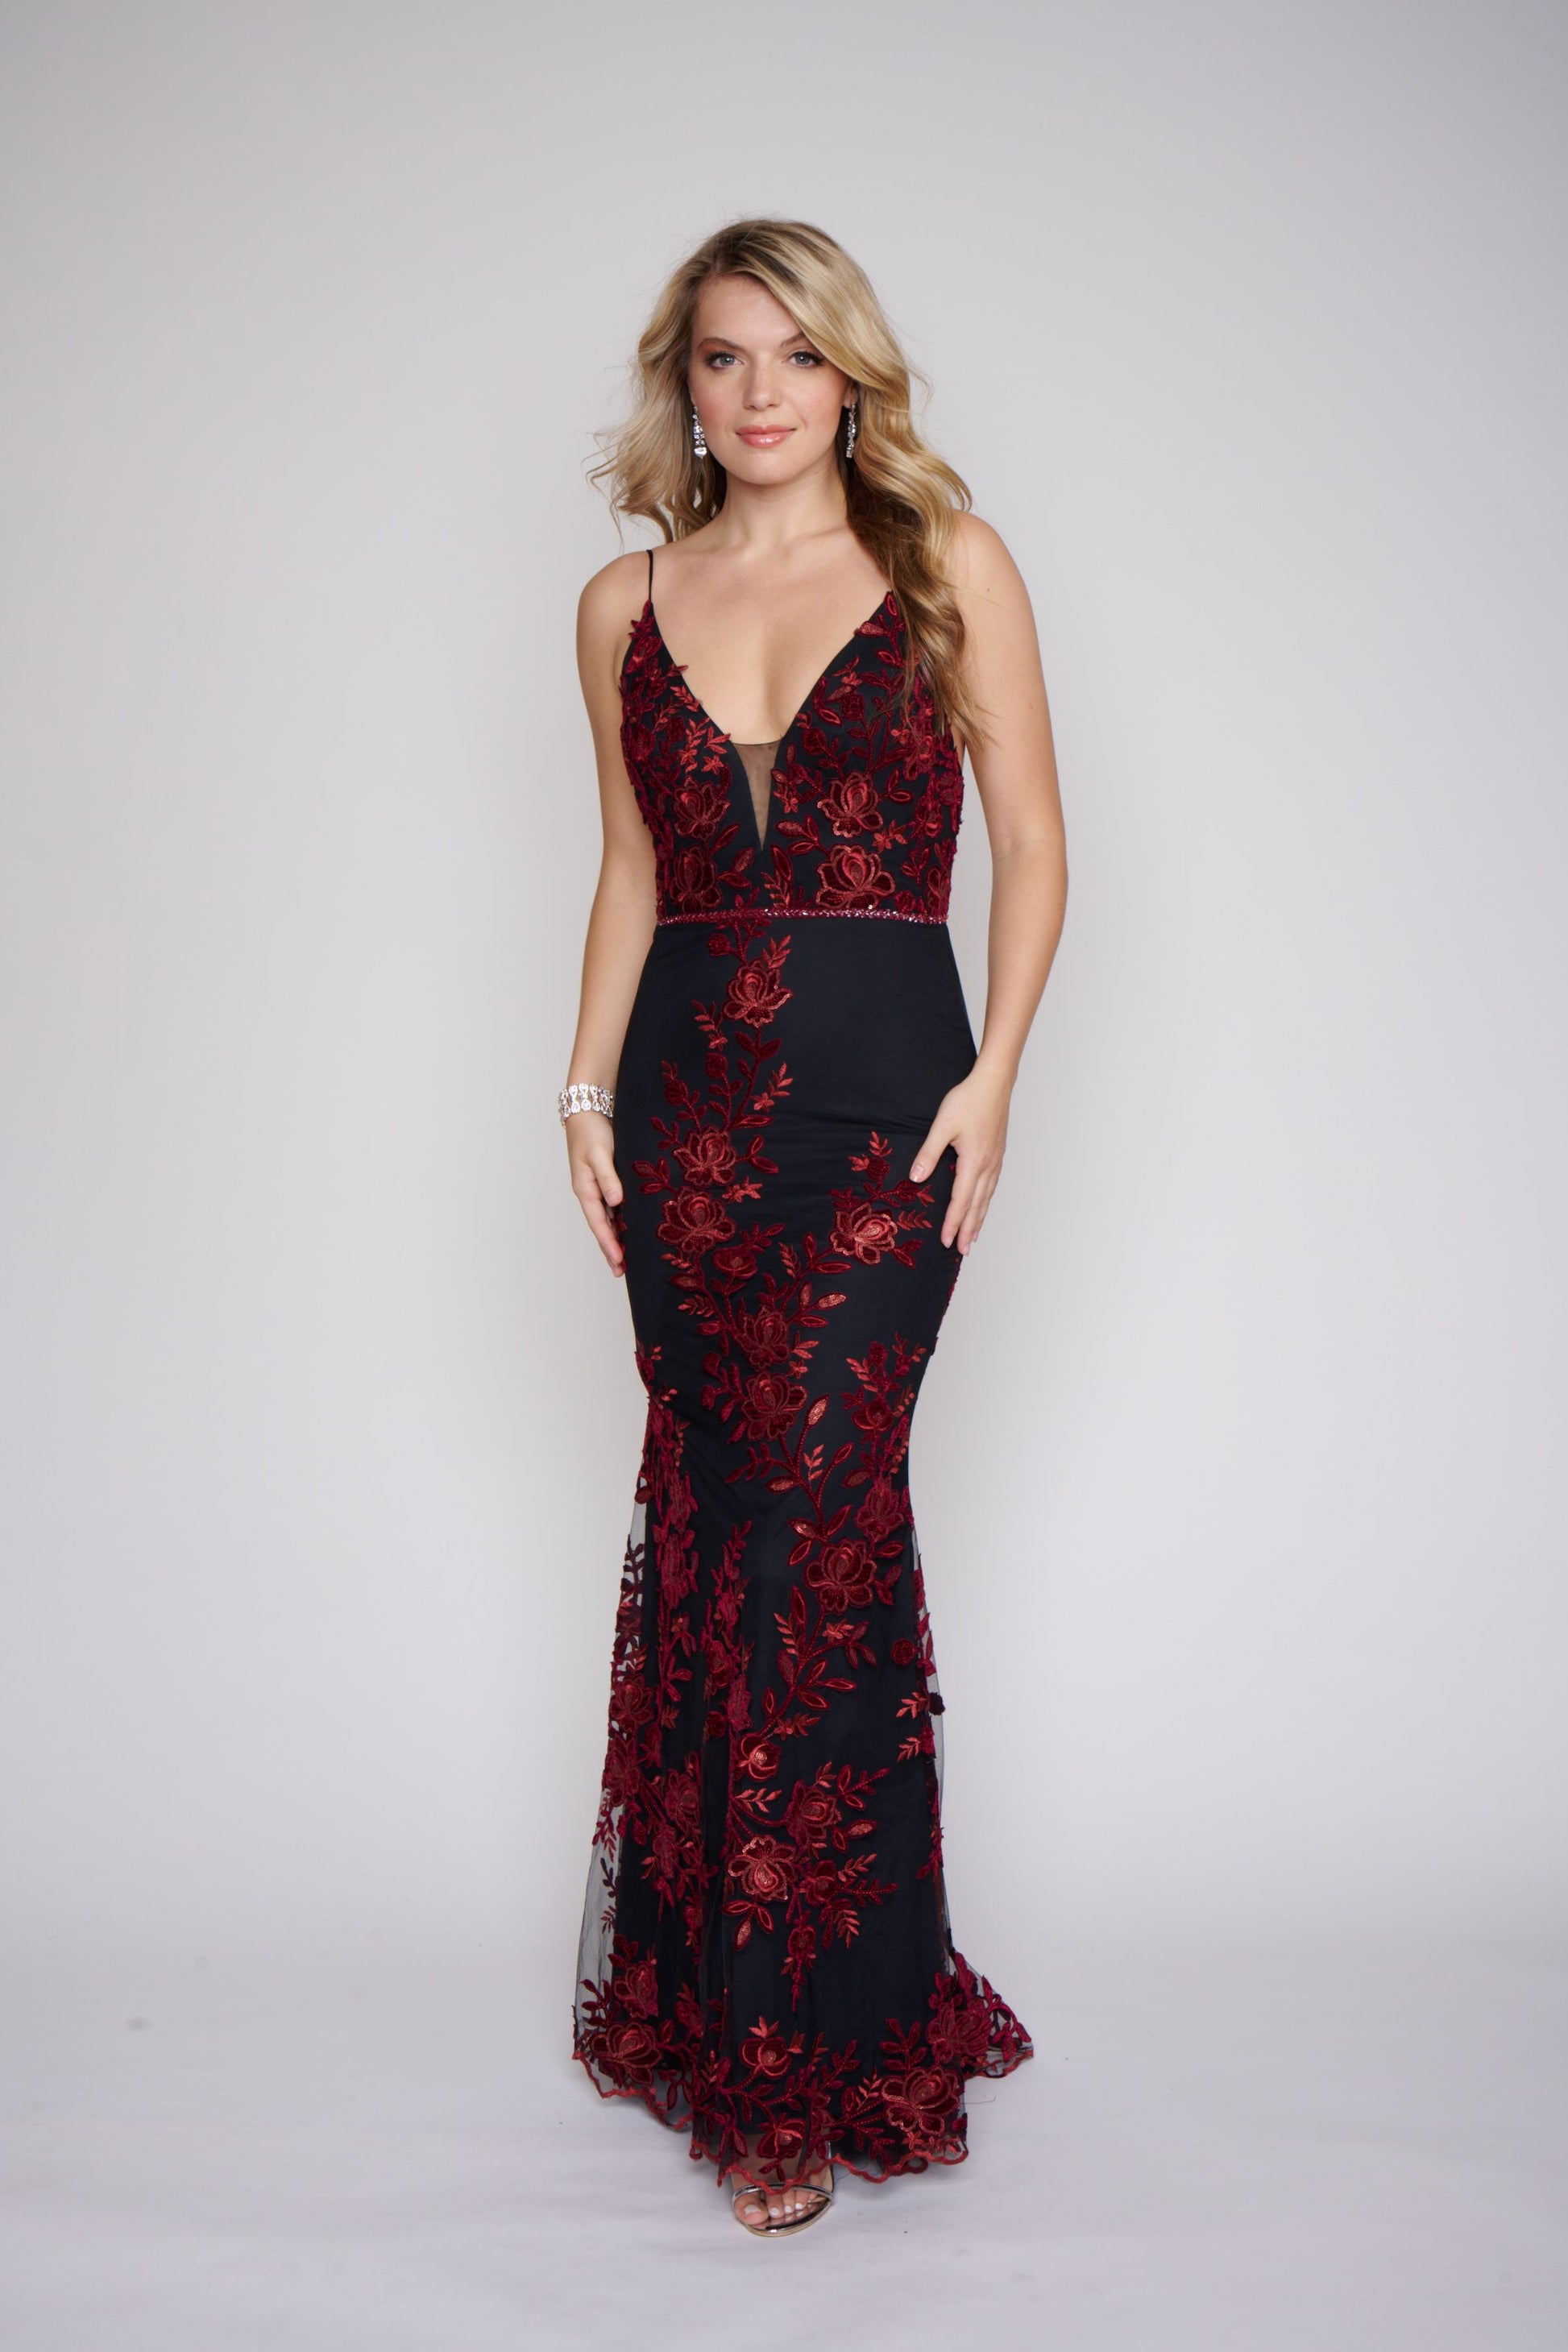 Nina Canacci 2240 Black Burgundy Long Prom Dress Fitted Evening Gown Floral Lace Dress This dress has a v neckline with sheer courtesy panel and a sheer lace back.  It is fully appliqued with Burgundy lace.  The fit and flare design is gorgeous on you and it has a matching embellished belt. 